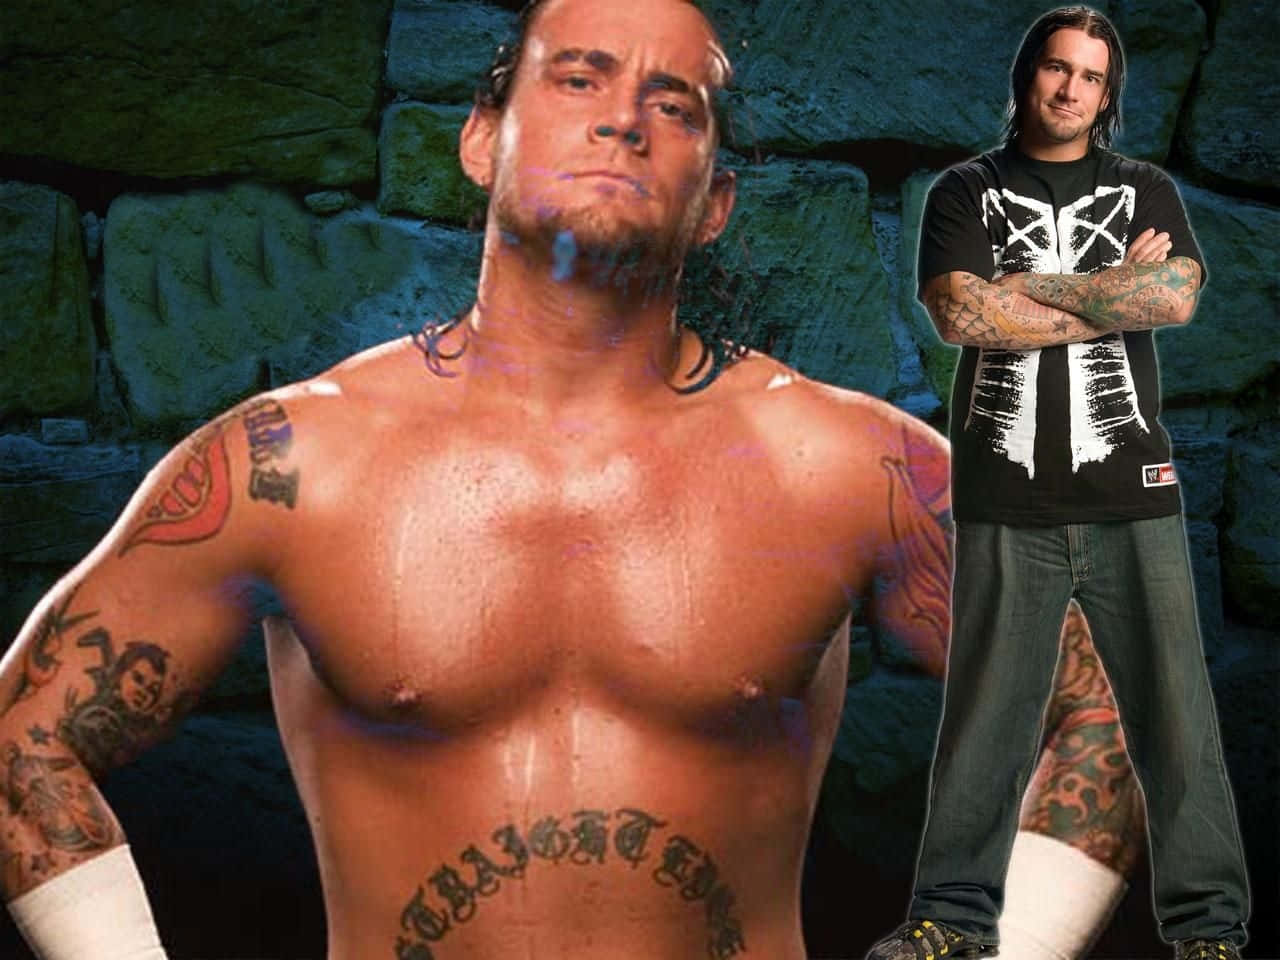 Wwe Wrestlers With Tattoos Standing Next To Each Other